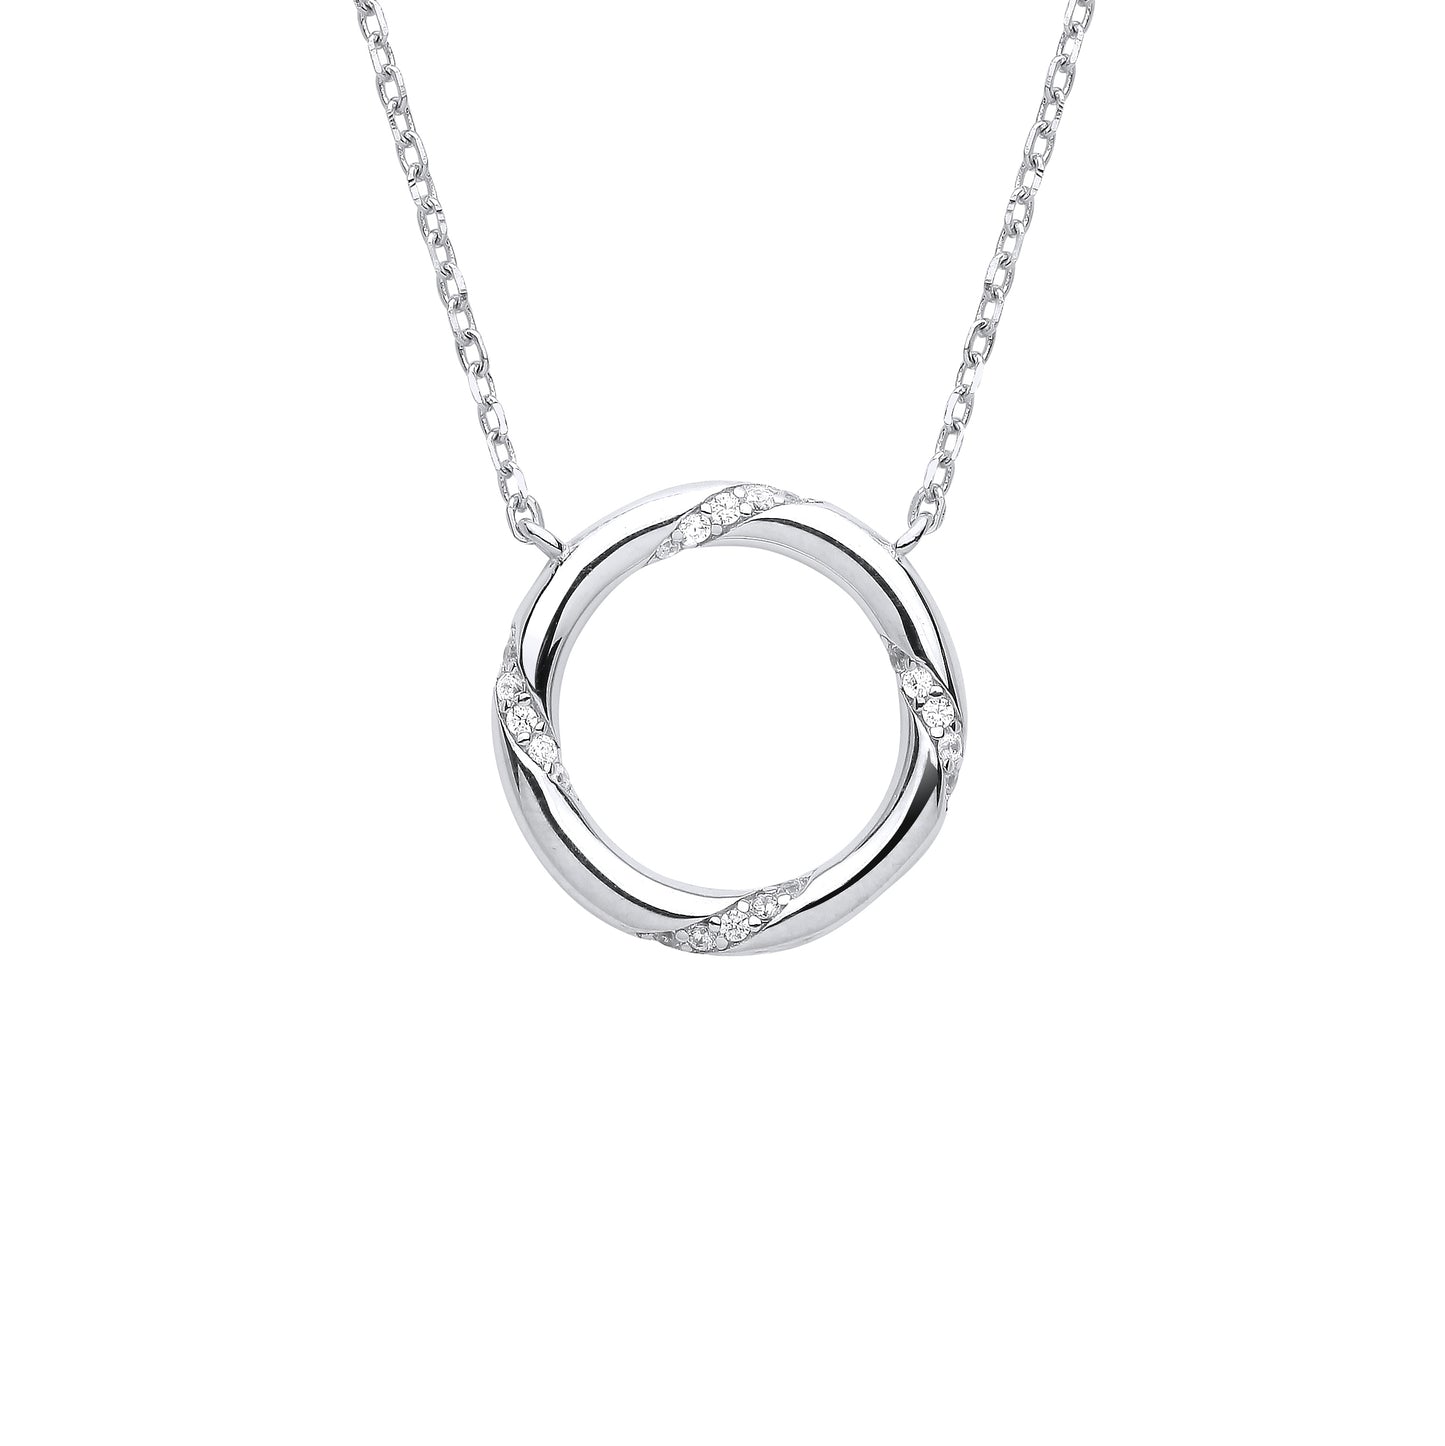 Silver  Twisting Meander Circle Lavalier Necklace - GVK374